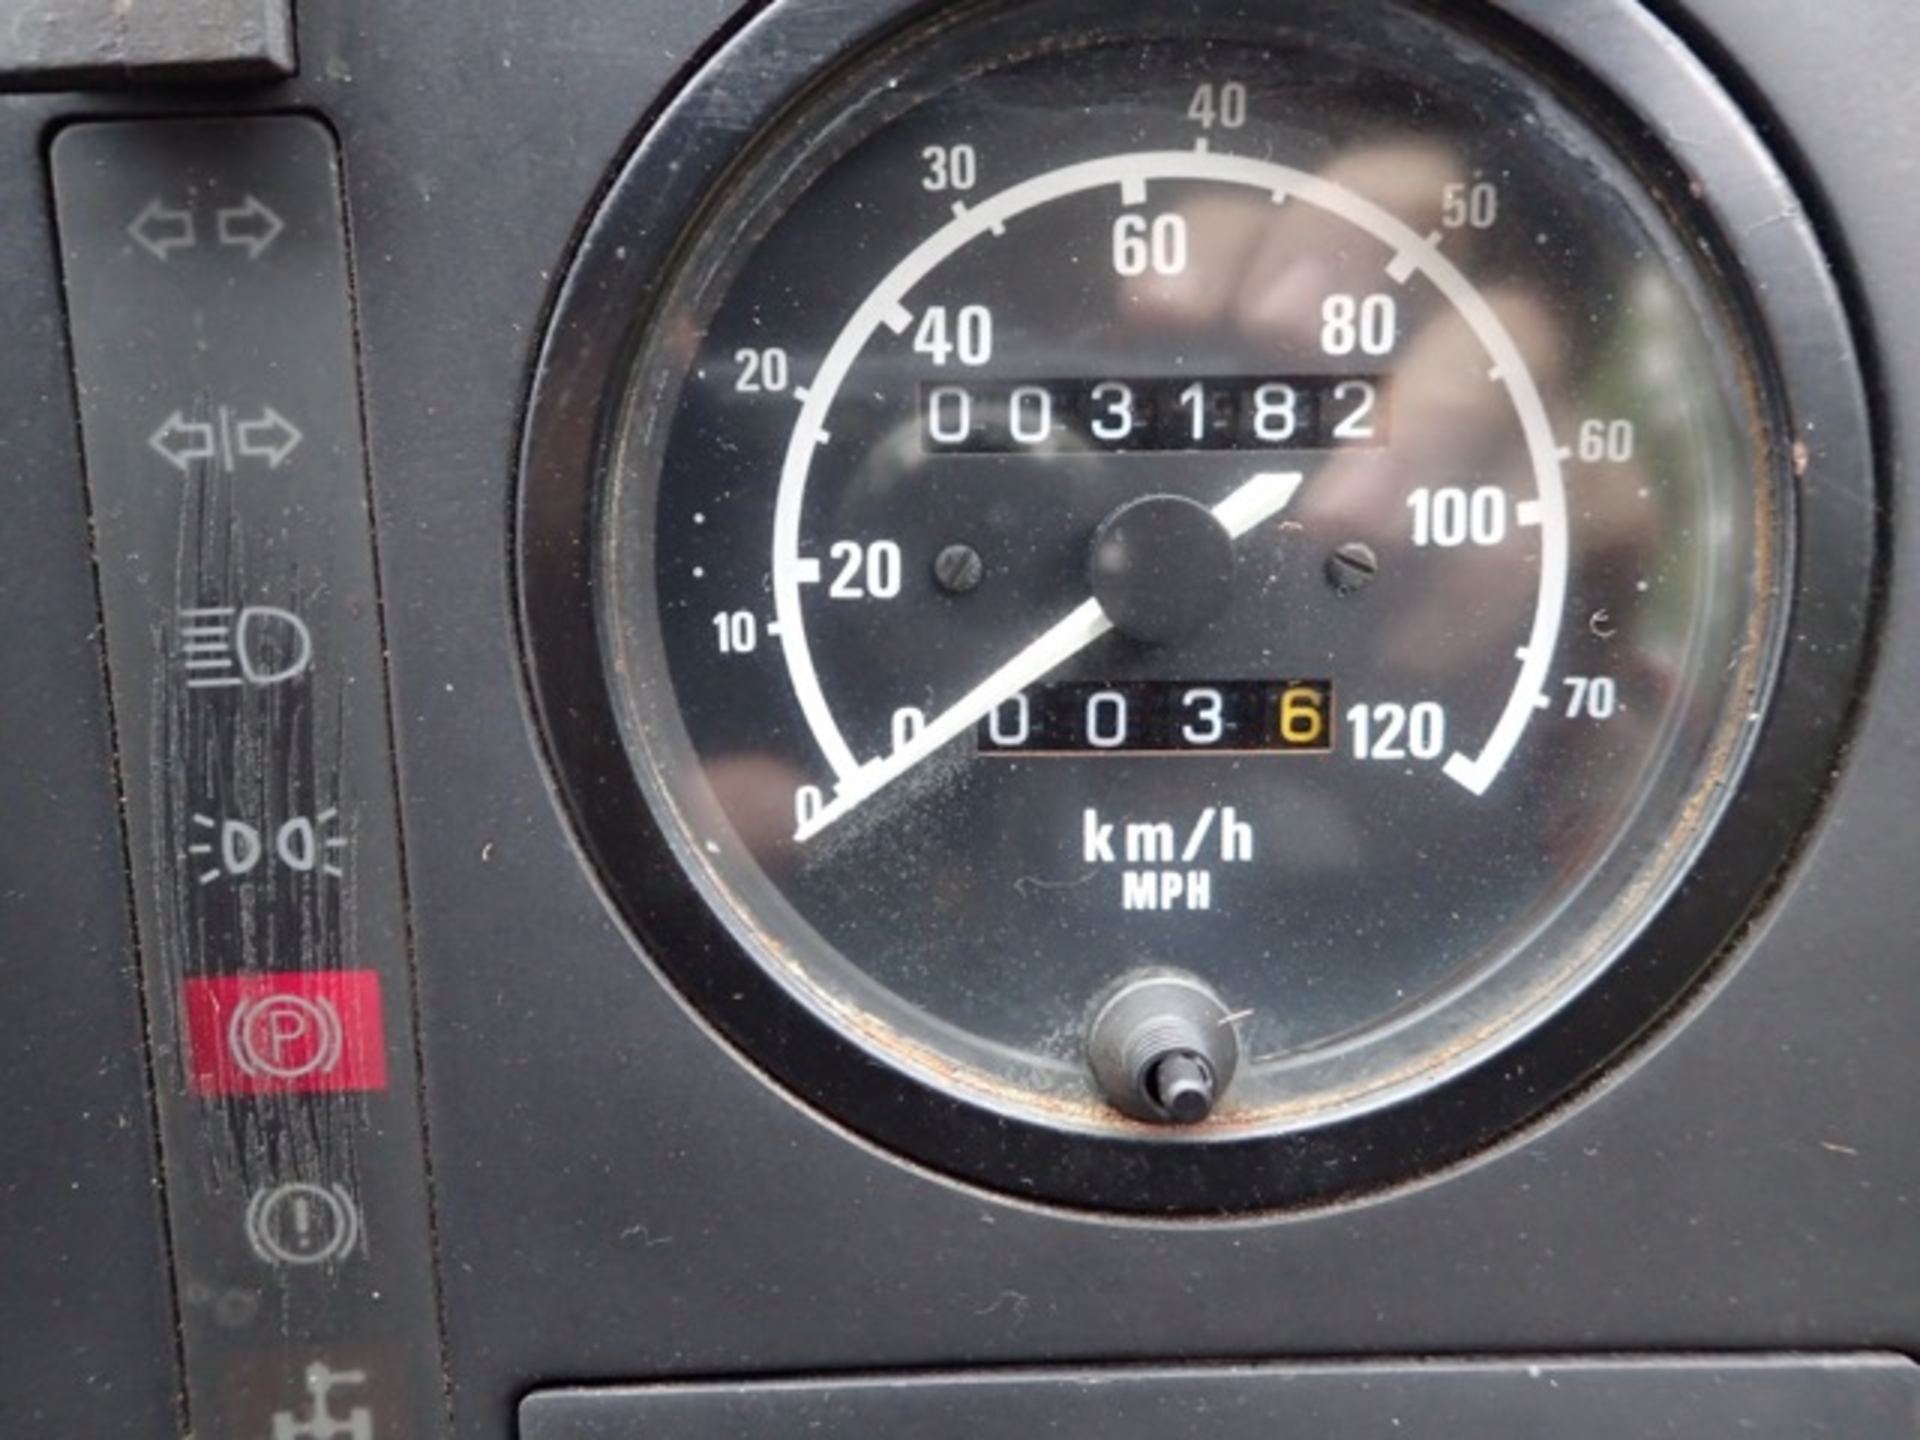 DAF 45-150 4x4 refuel wagon (Ex MOD) S/N: 123435 Recorded Mileage: 3182 c/w discharge hoses, - Image 10 of 10